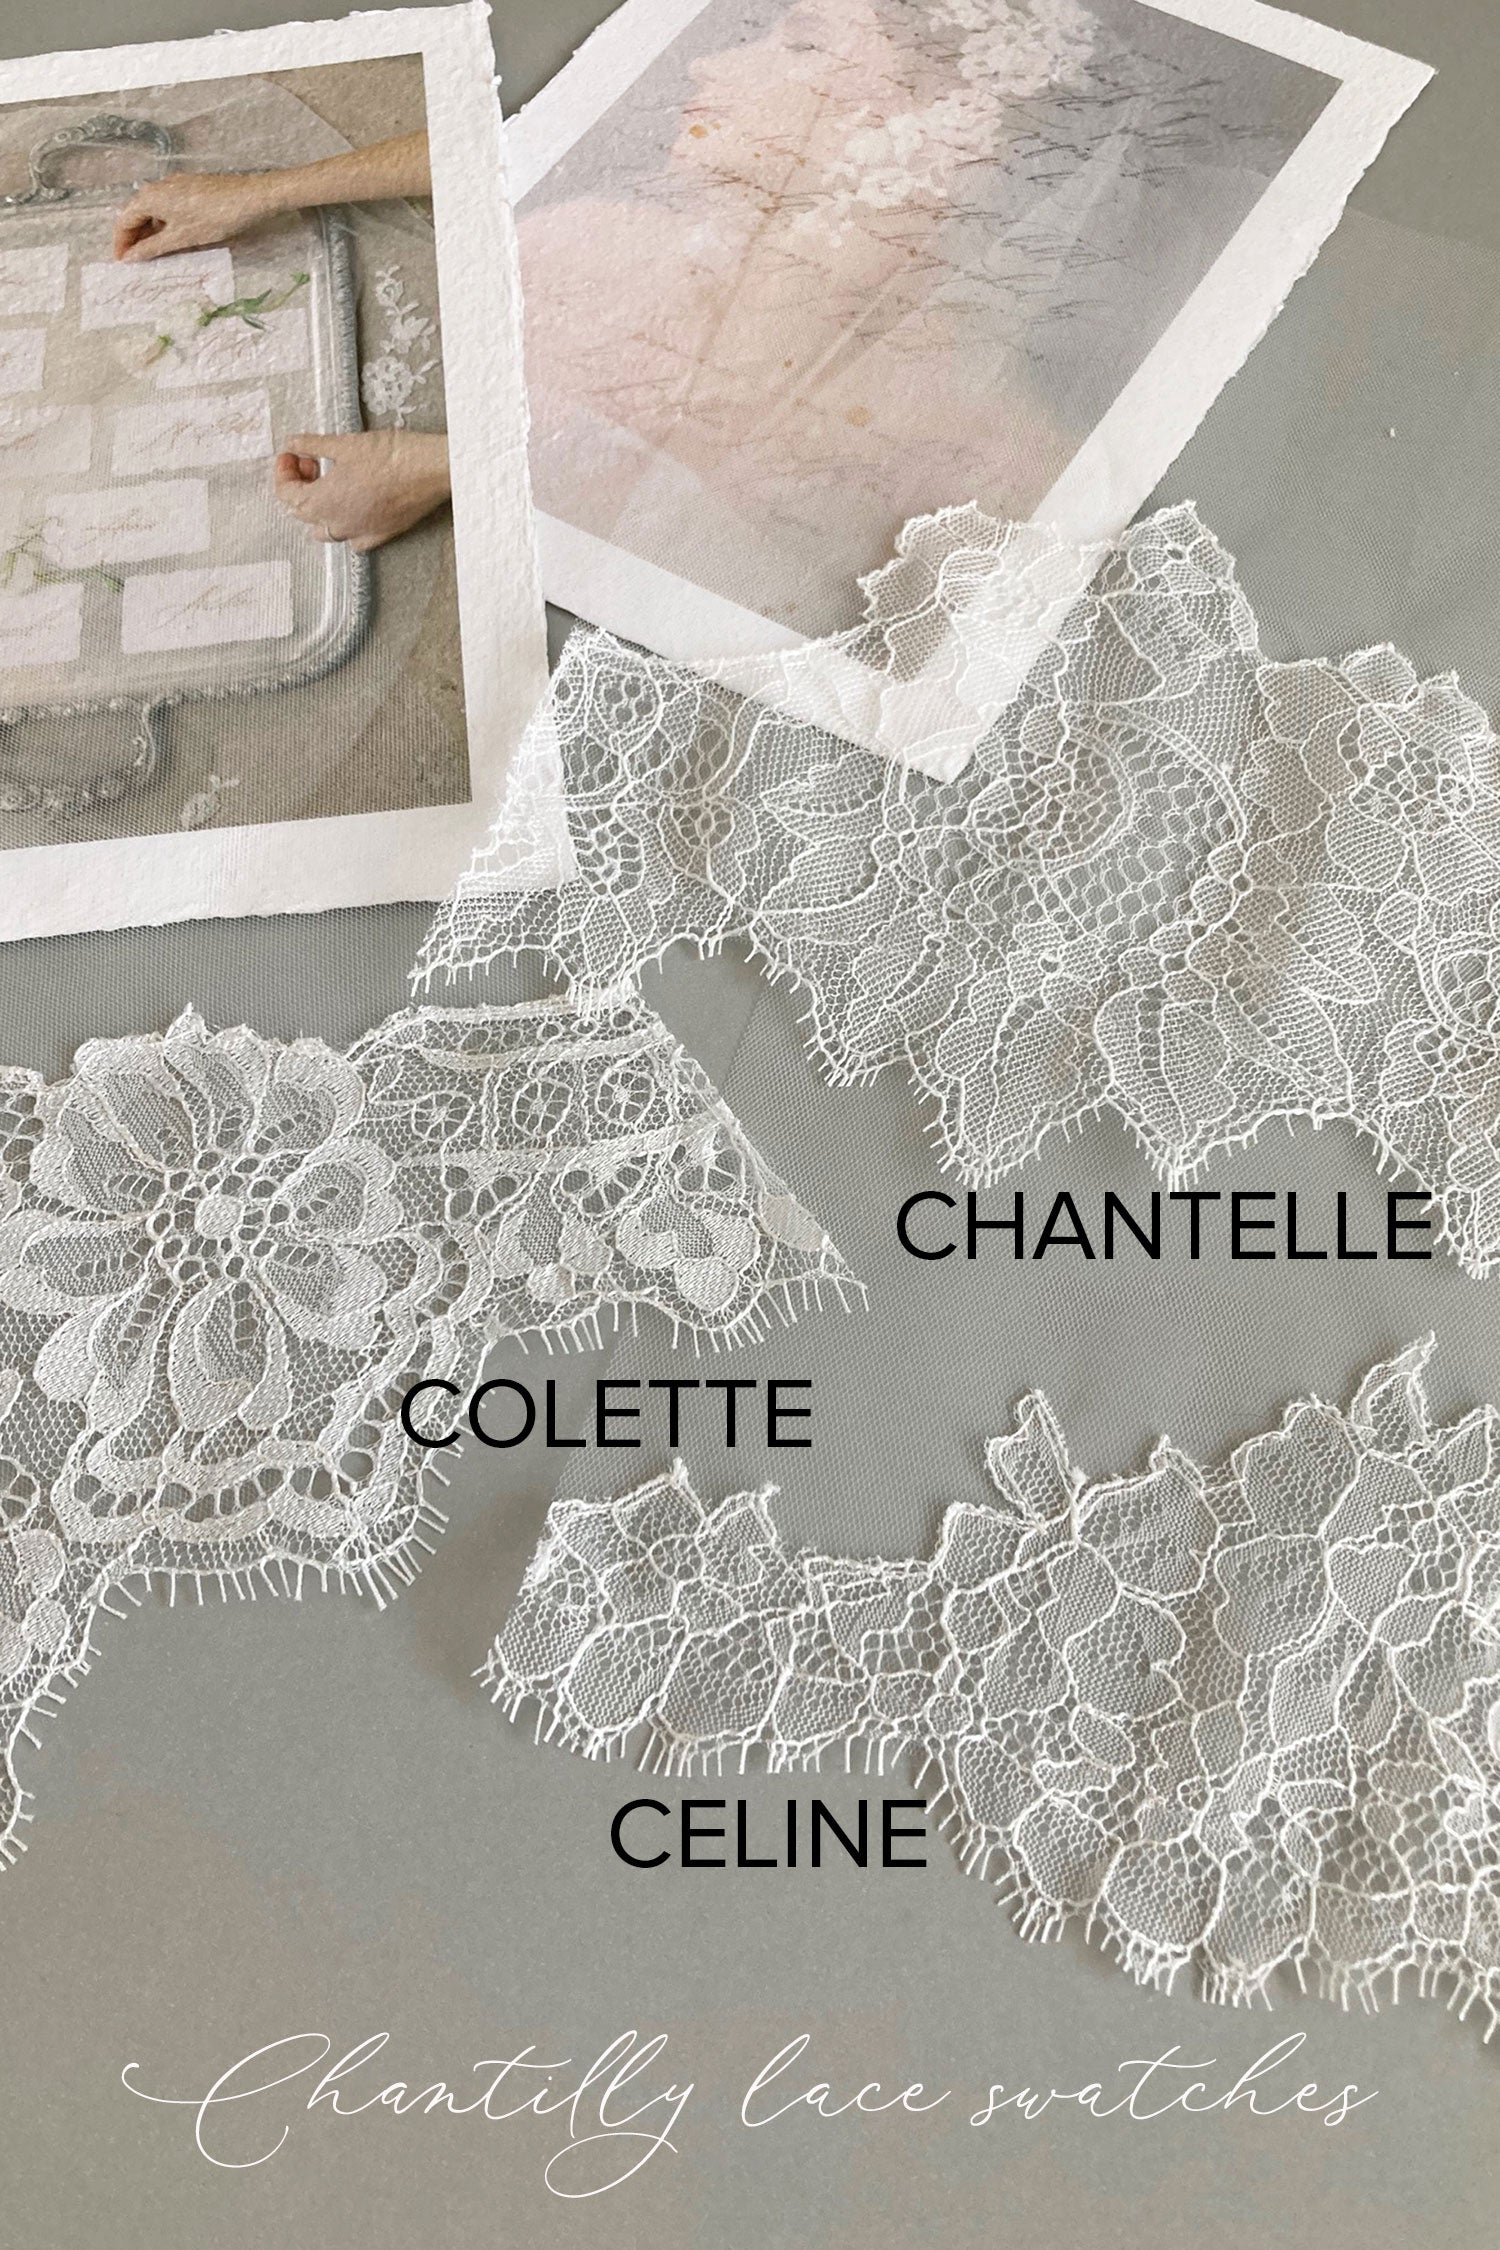 CHANTILLY LACE SAMPLES